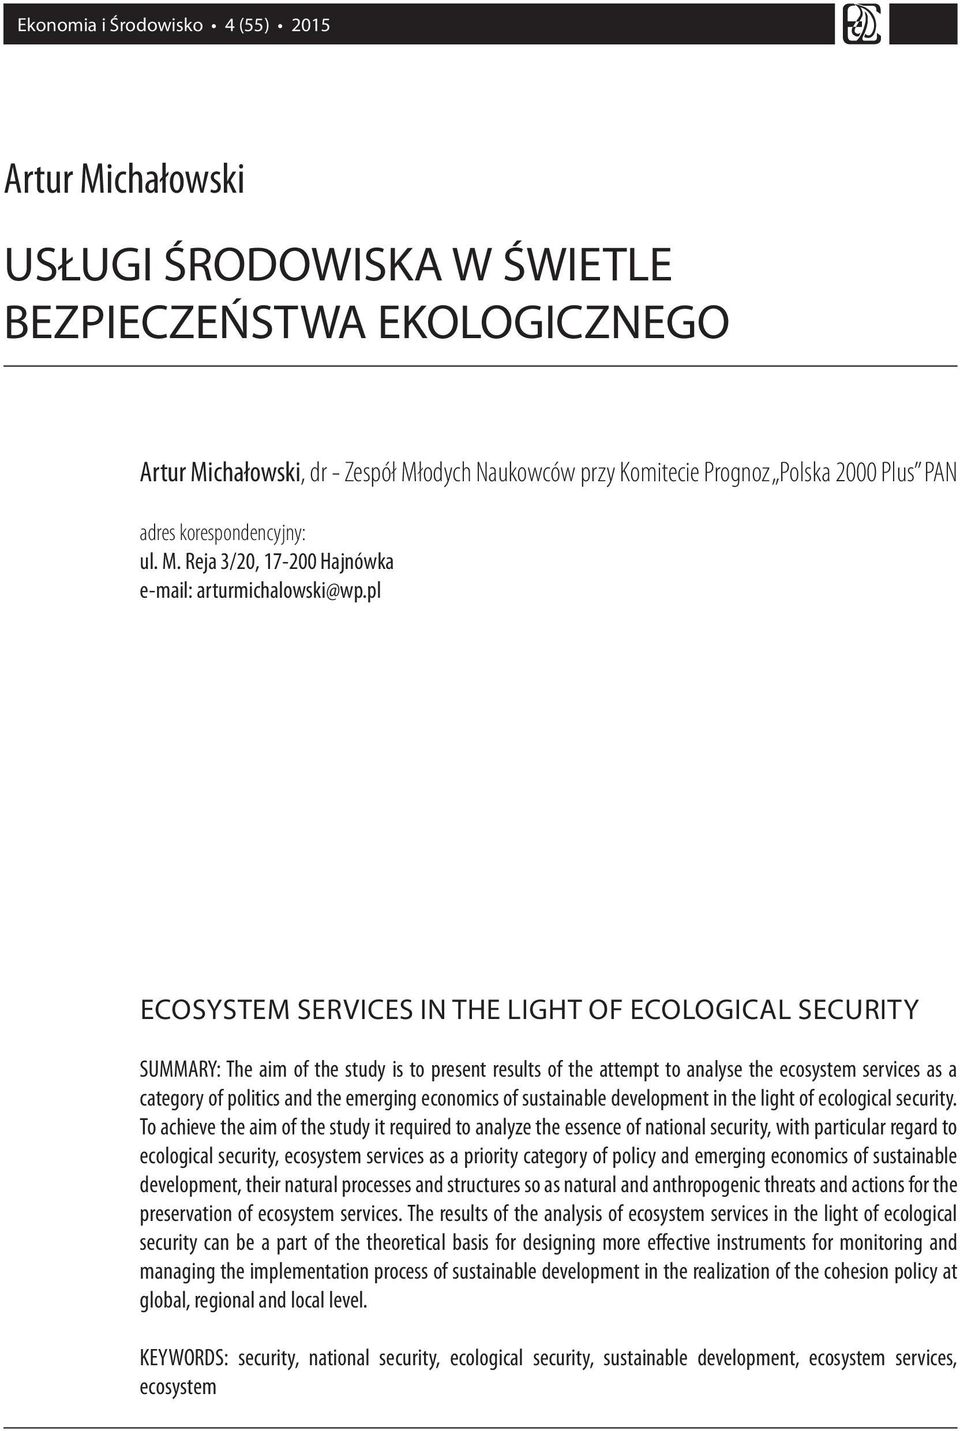 pl ECOSYSTEM SERVICES IN THE LIGHT OF ECOLOGICAL SECURITY SUMMARY: The aim of the study is to present results of the attempt to analyse the ecosystem services as a category of politics and the